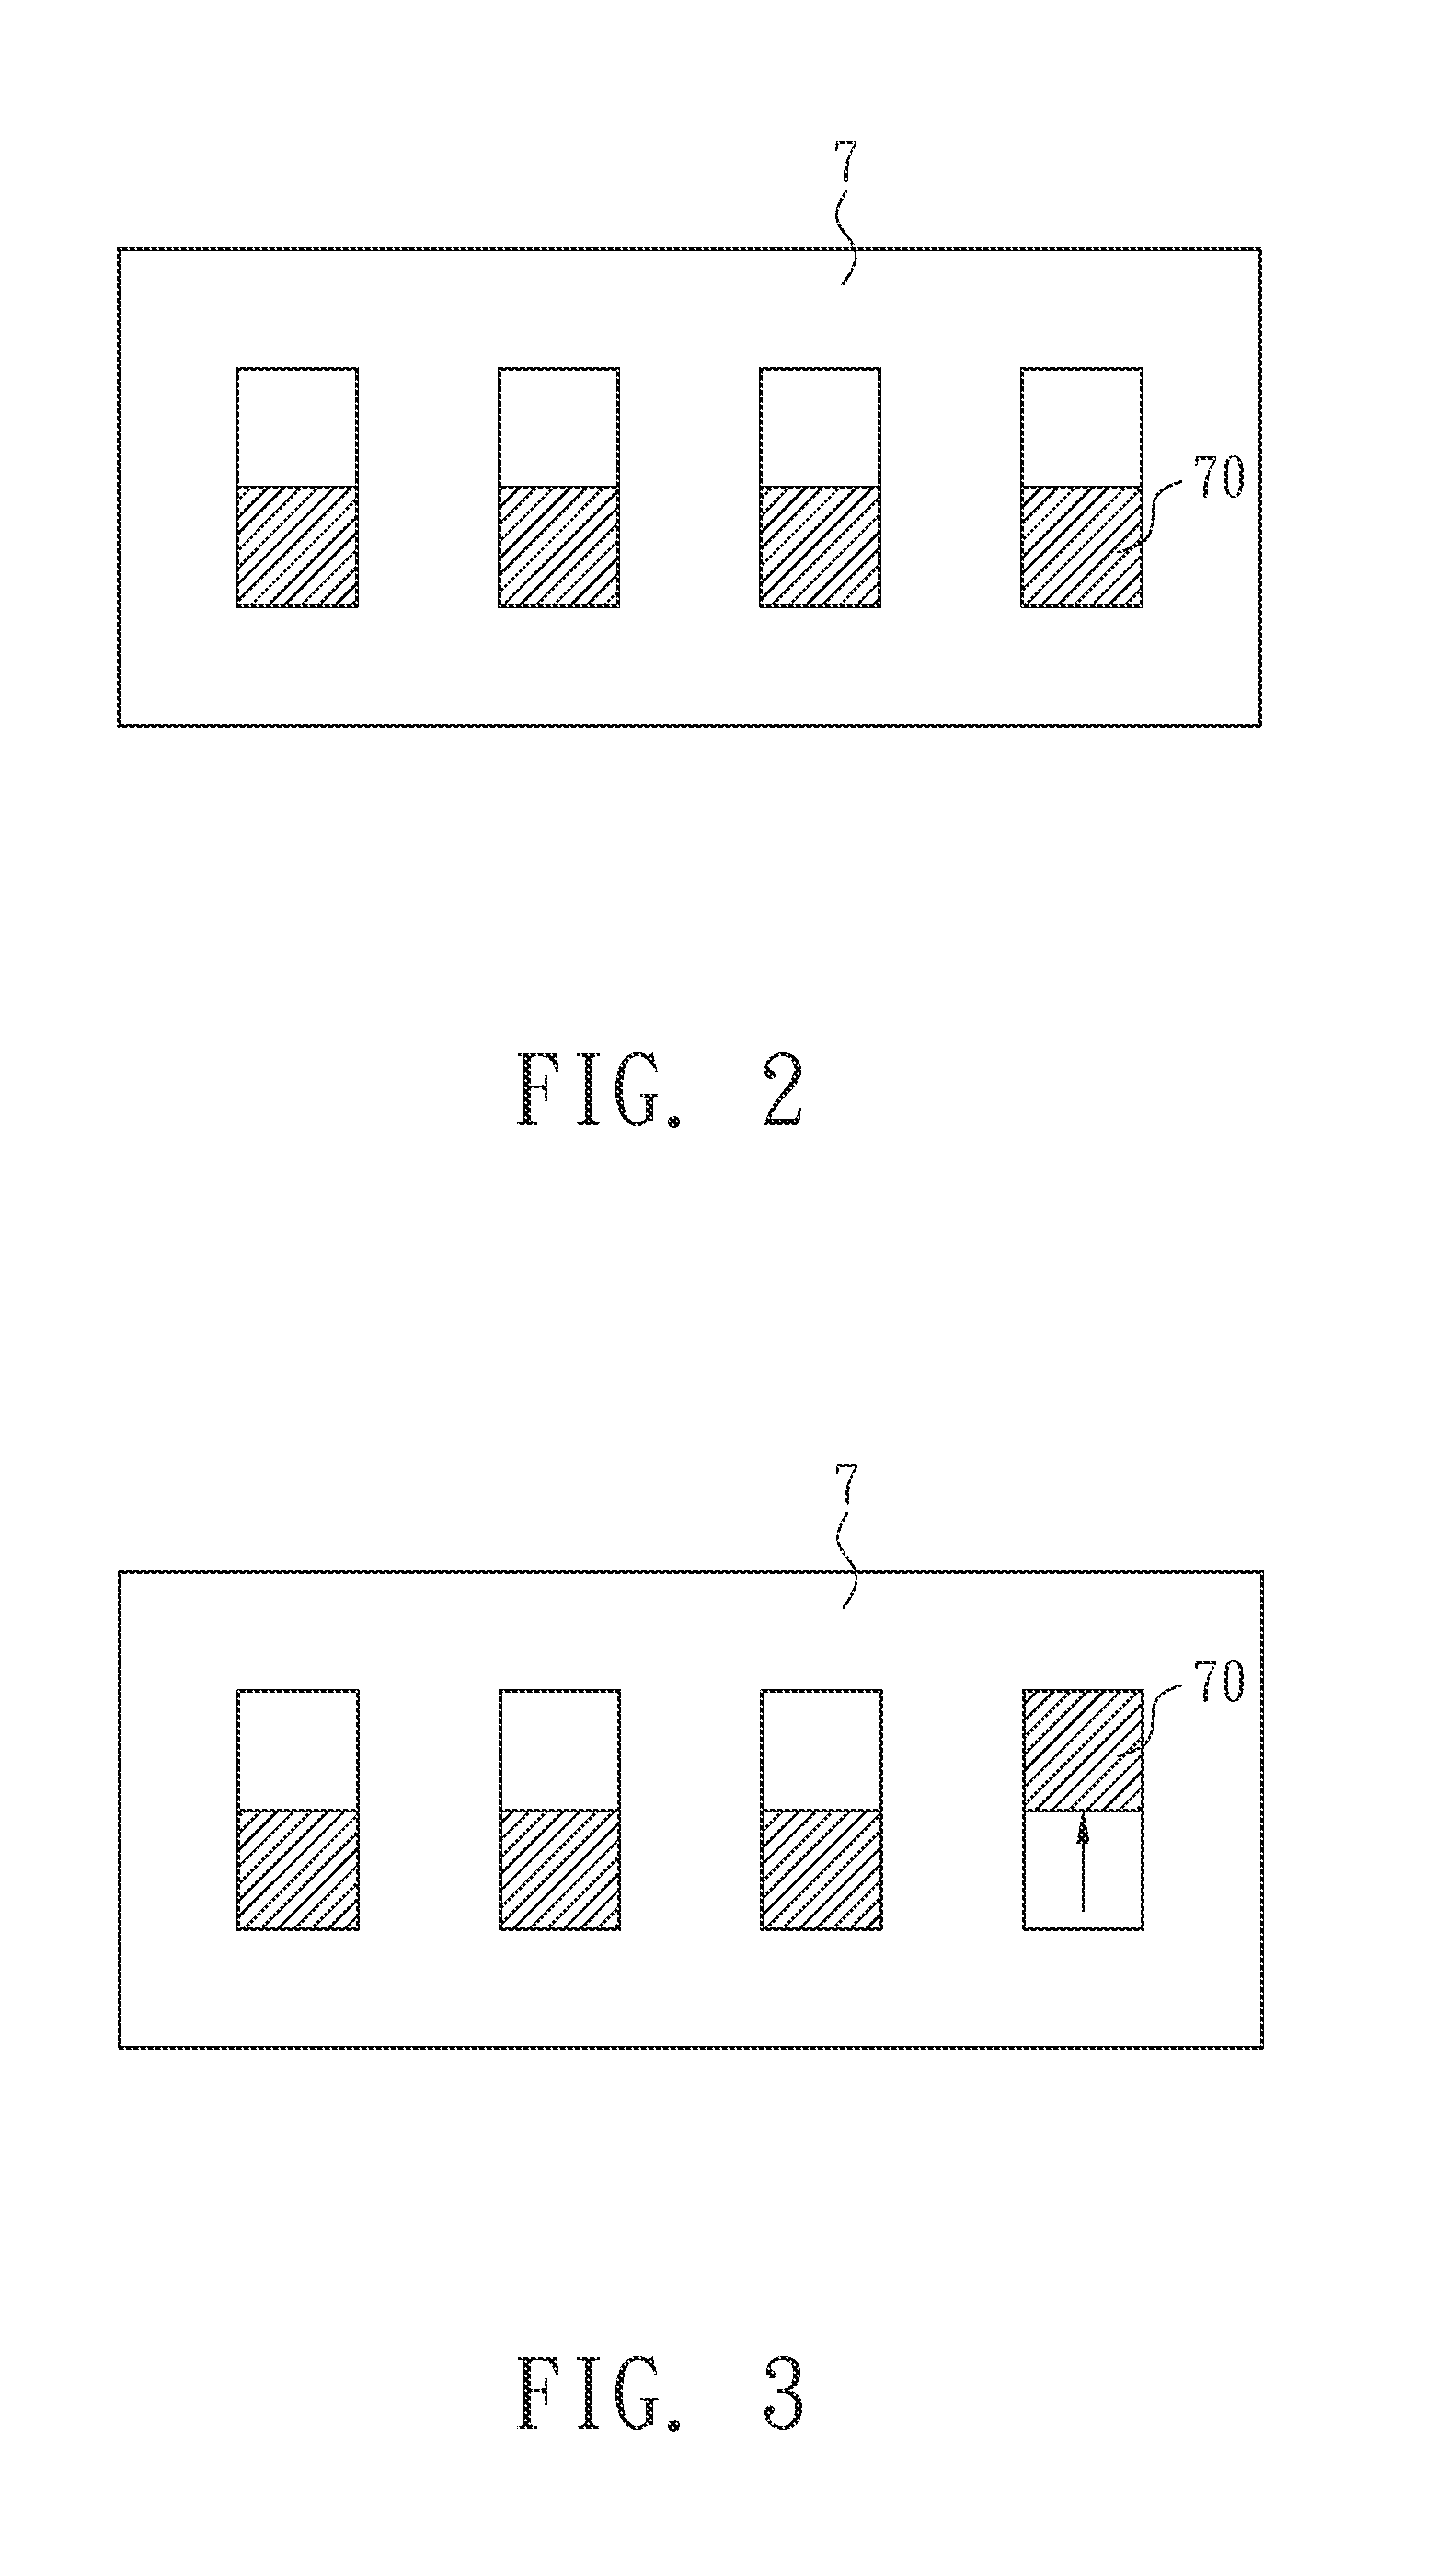 Ceiling Fan Controller Using a Dip Switch to Set Rotation Speed Thereof